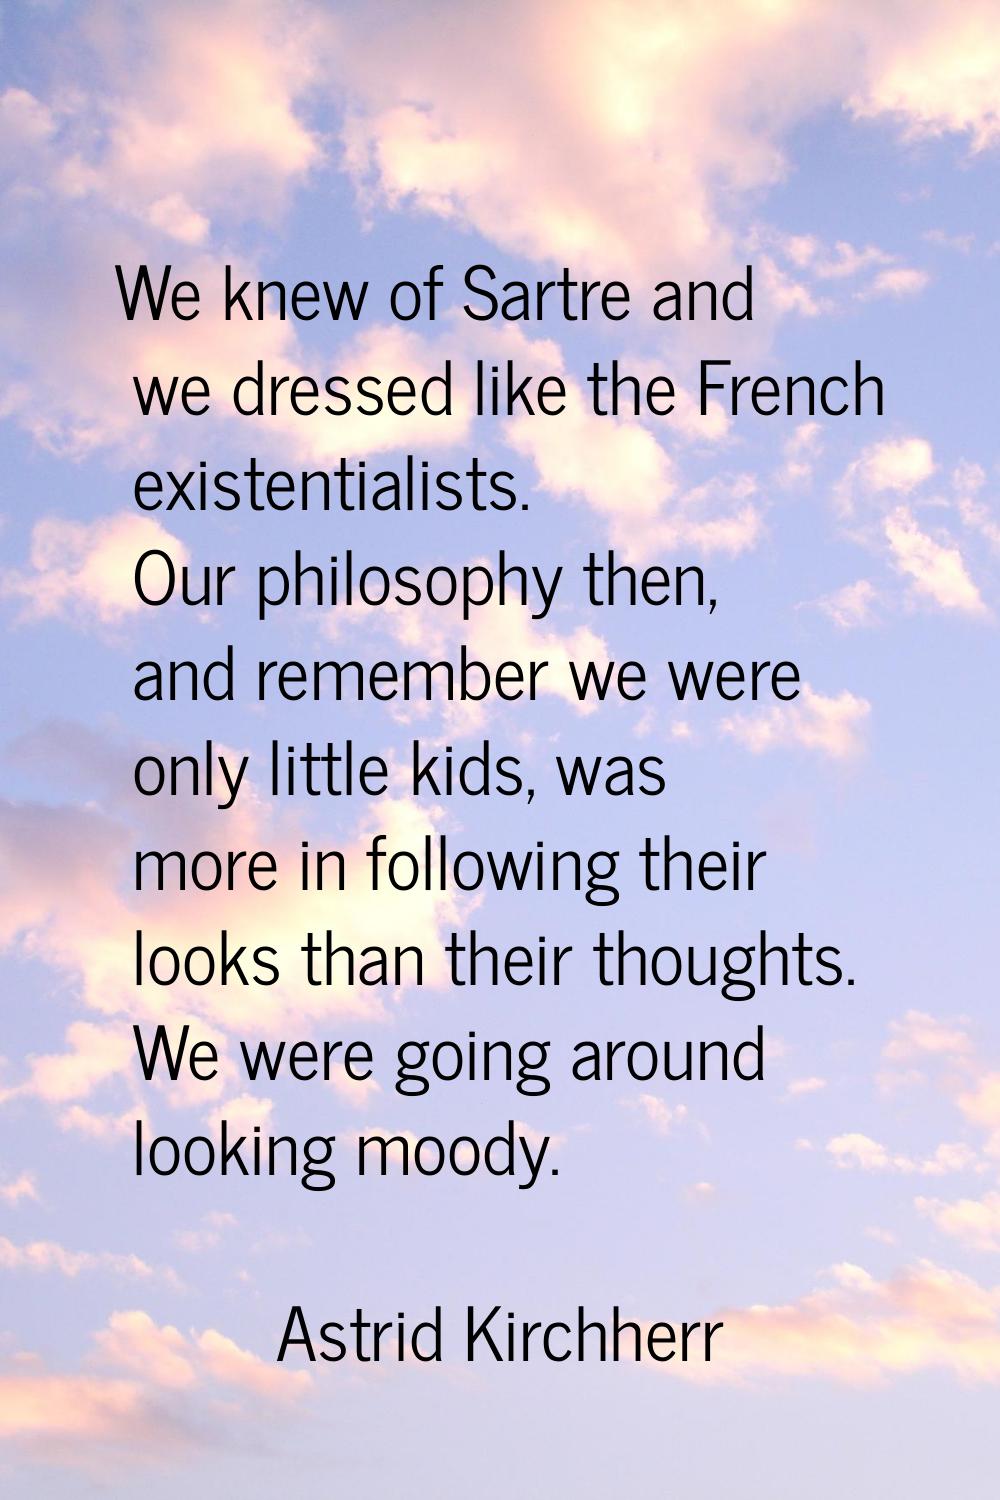 We knew of Sartre and we dressed like the French existentialists. Our philosophy then, and remember